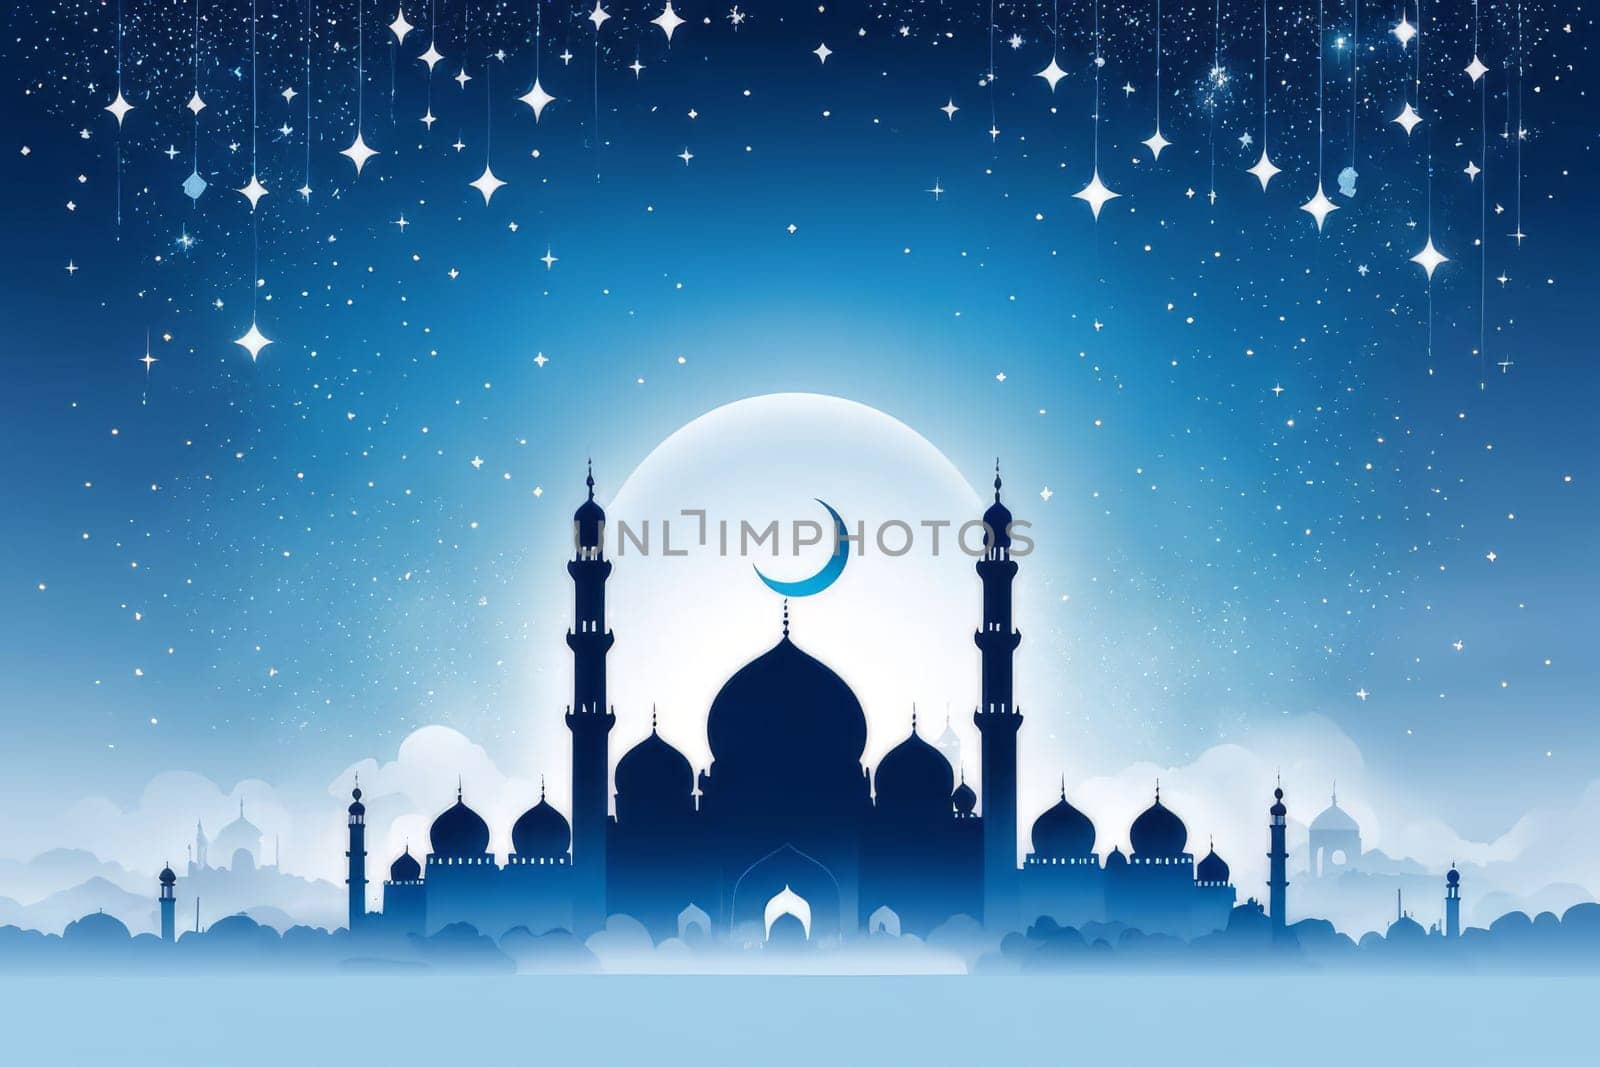 Eid AlFitr-themed illustration with a serene blue and white color palette. A mosque silhouette rises in the misty sky, embellished with shimmering stars